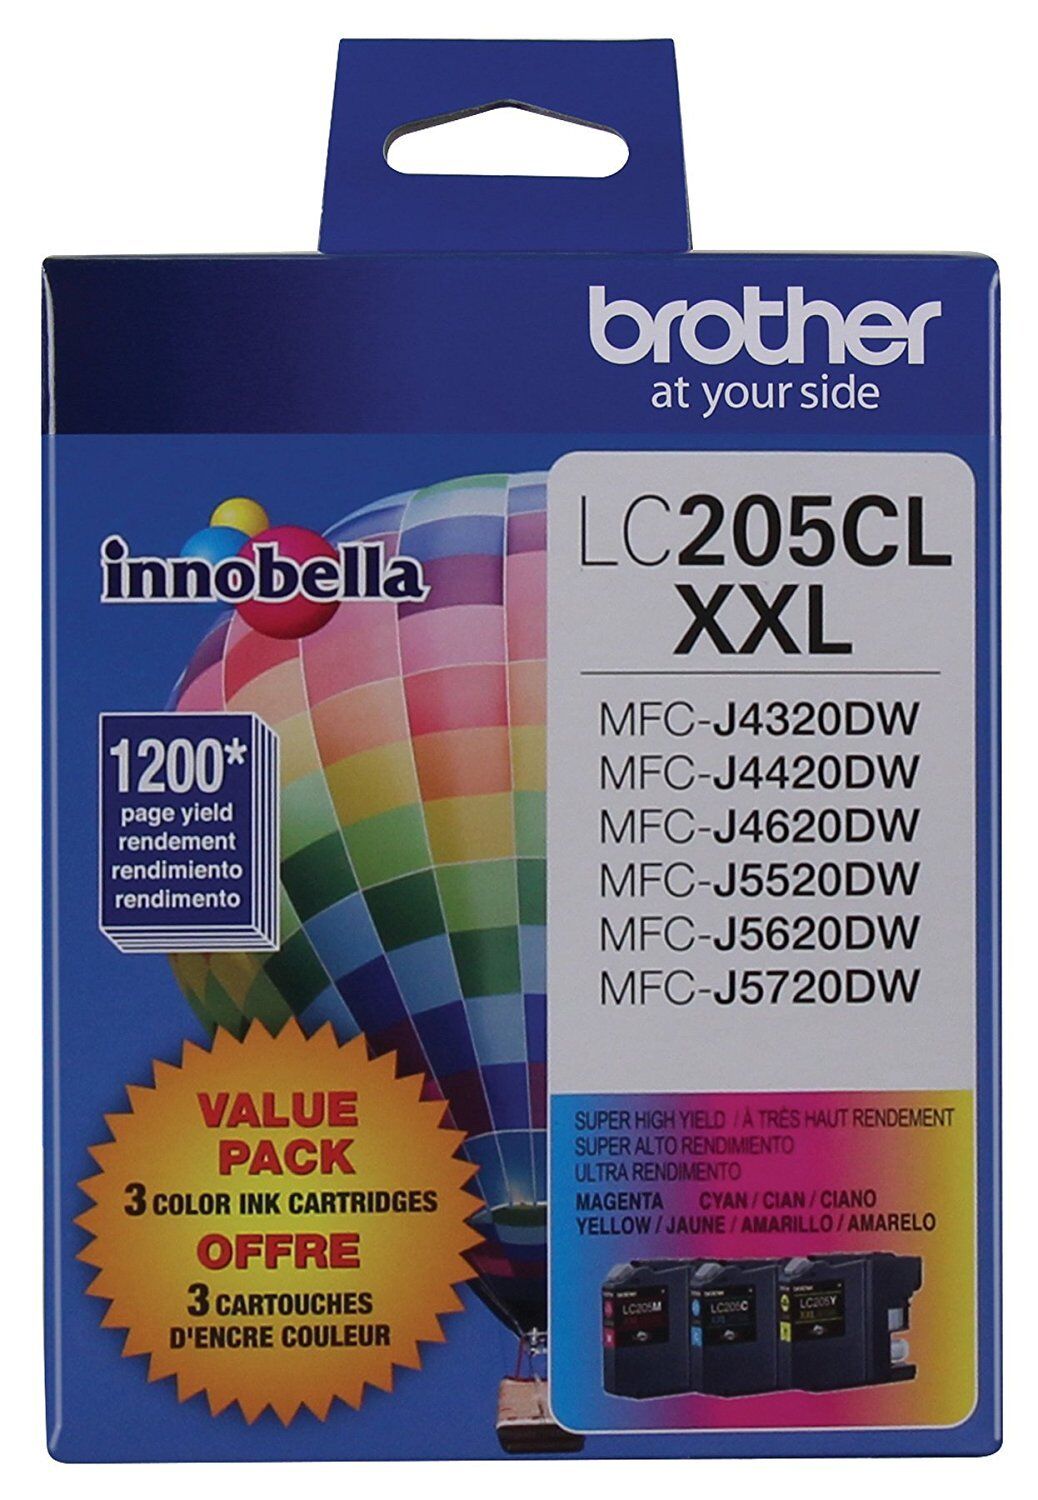 GENUINE Brother LC205 XXL Ink 3 Pack for MFC-J4320DW, MFC-J4420DW, MFC-J4620DW